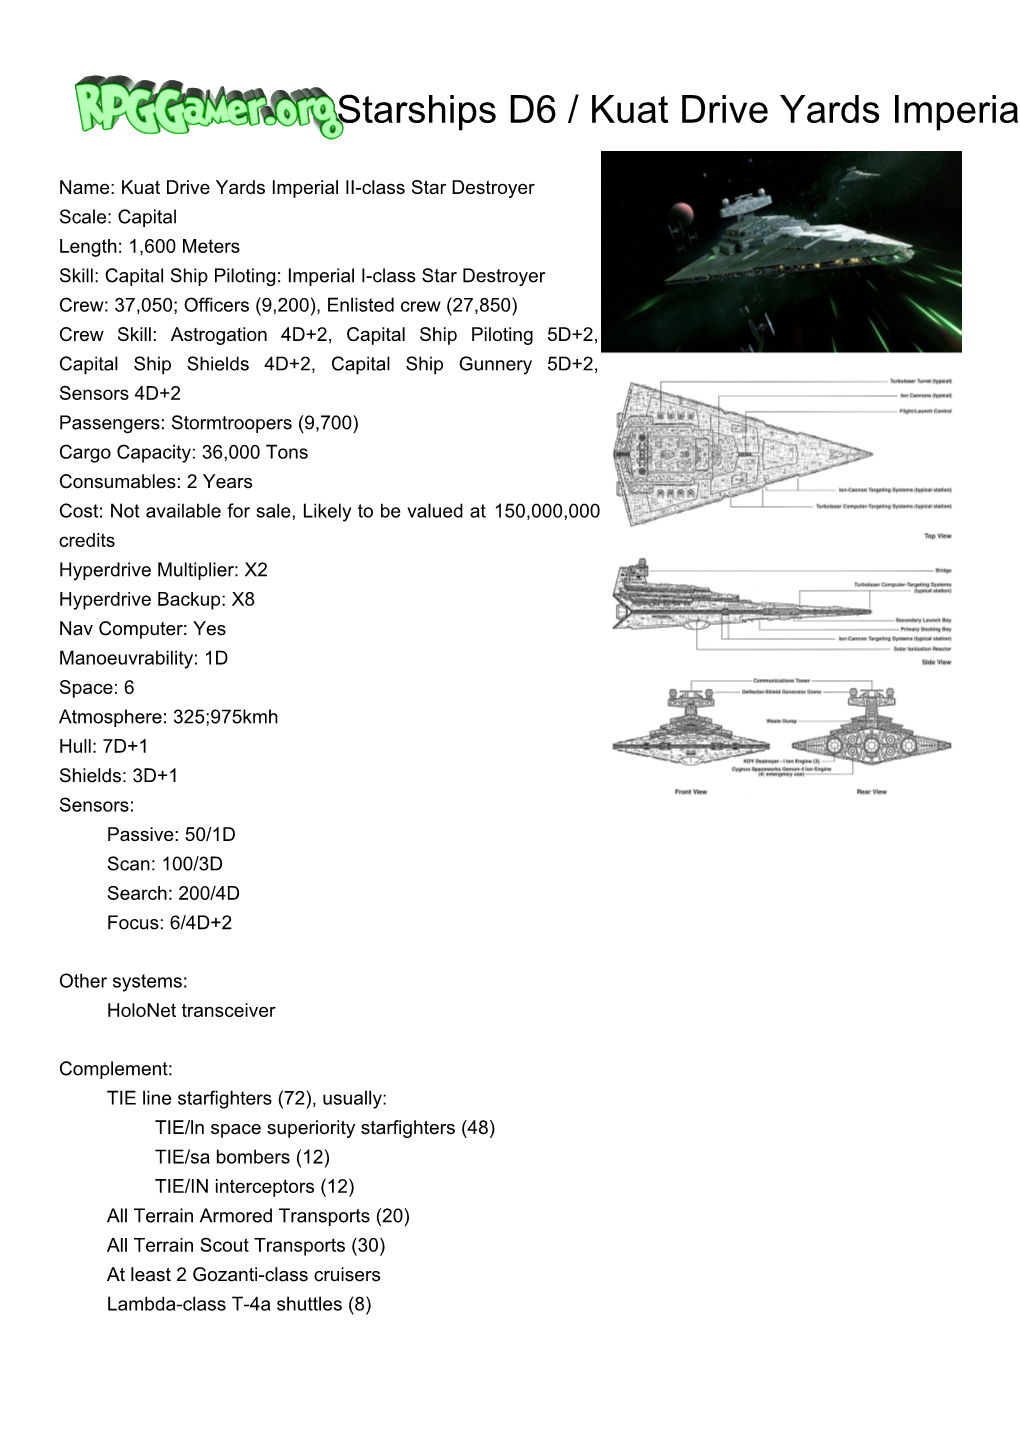 Starships D6 / Kuat Drive Yards Imperial II-Class Star Destroyer